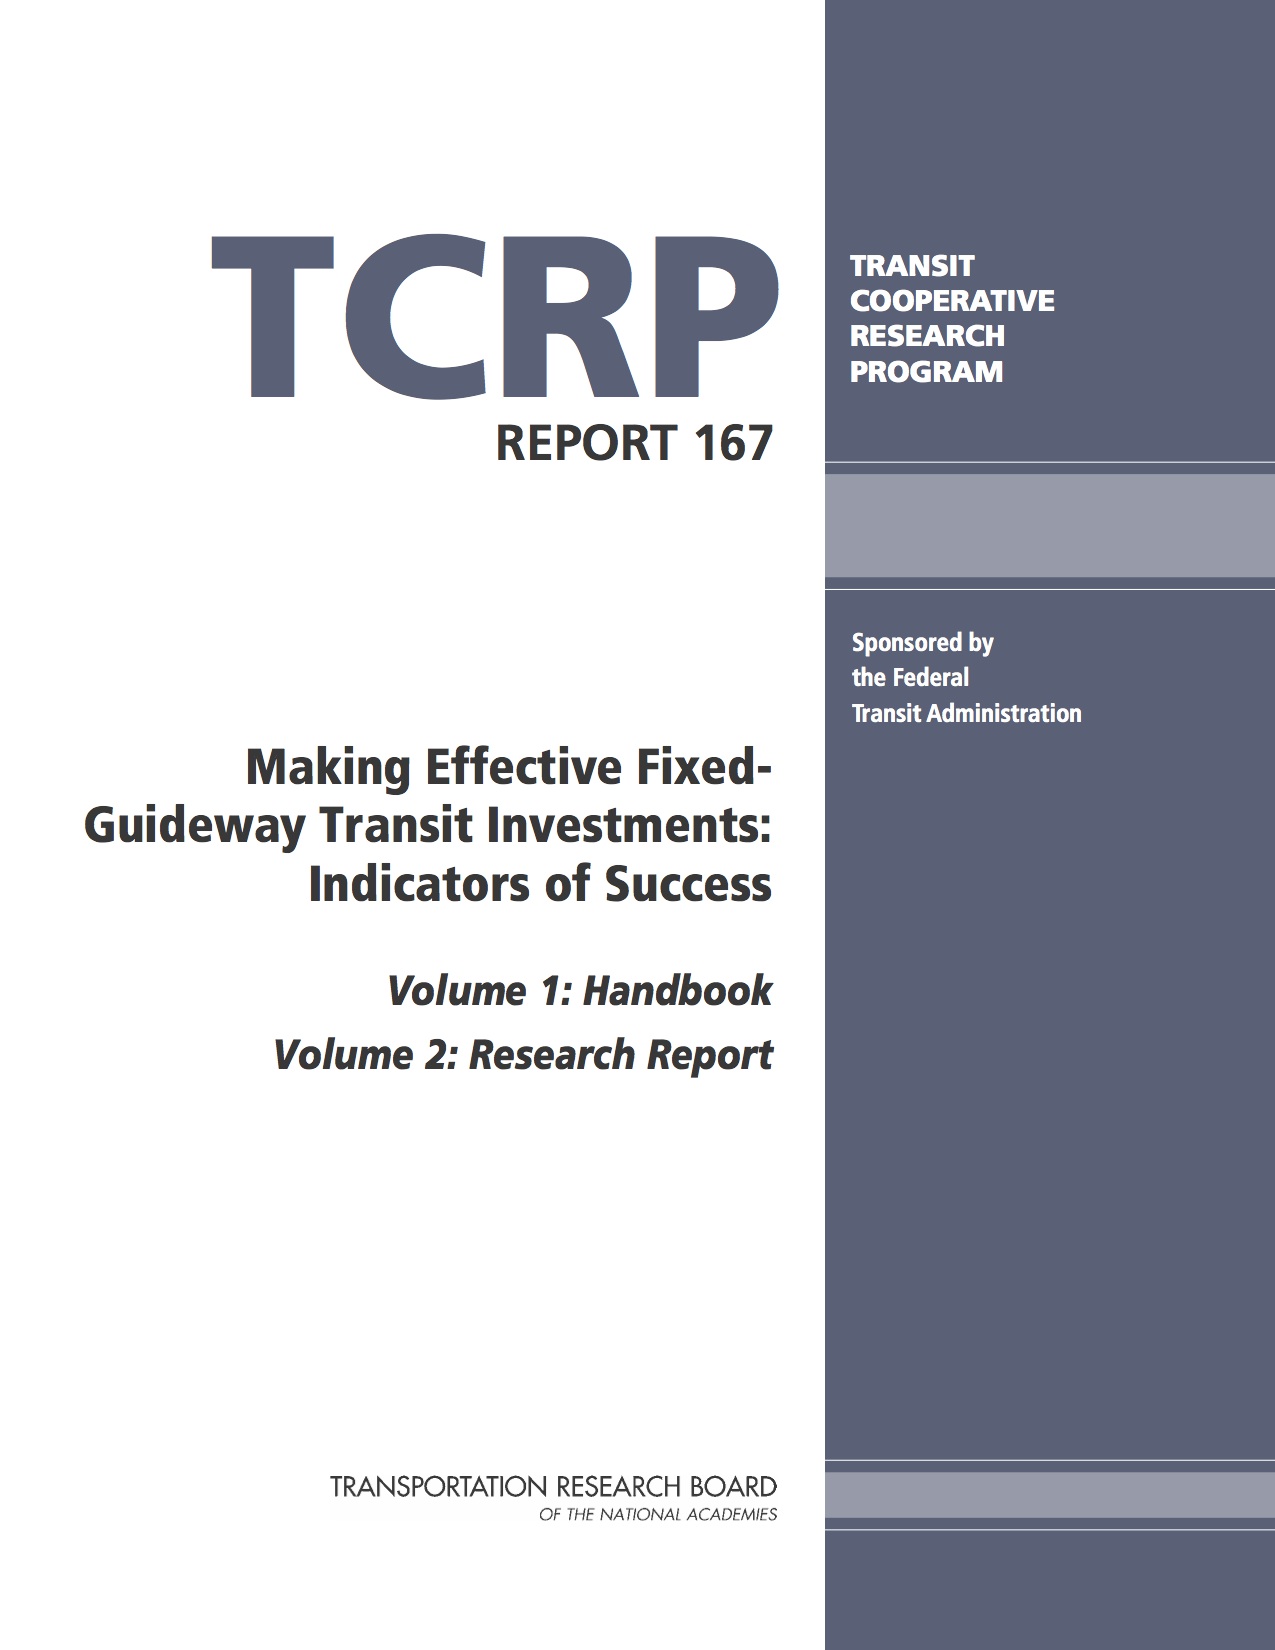 TCRP 167: Making Effective Fixed Guideway Investments